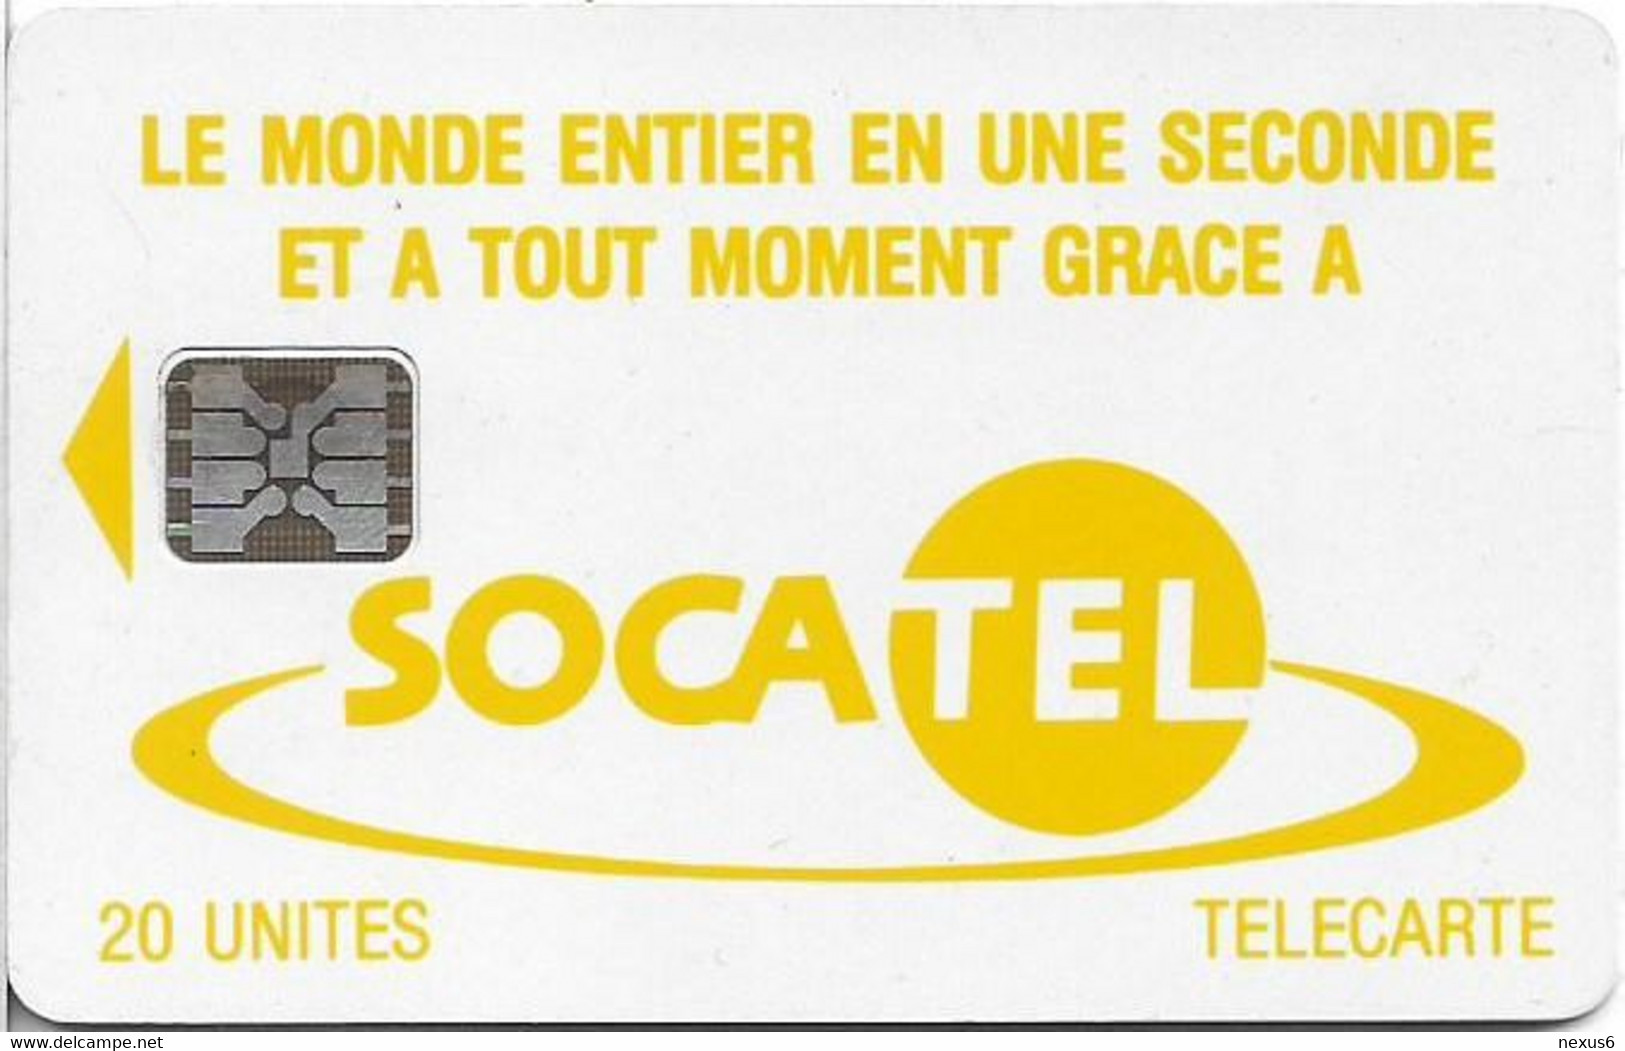 Central African Rep. - Socatel - Logo Yellow, SC5 (Cn. 00547), 20Units, Used - Repubblica Centroafricana